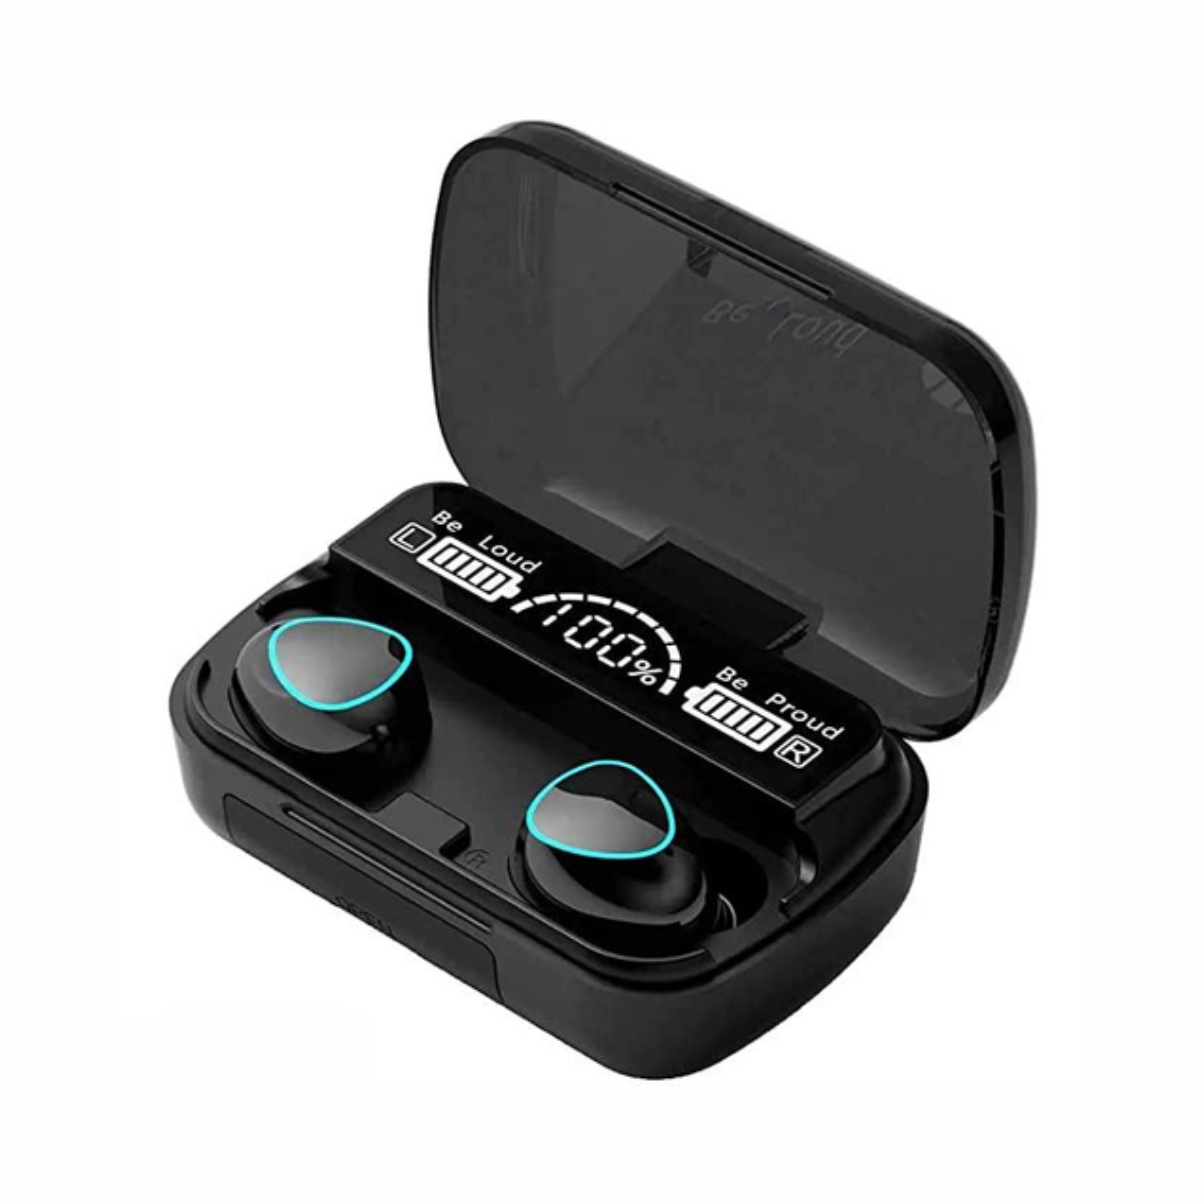 True Wireless Stereo Sound Earbuds with Charging Box - Black Edition